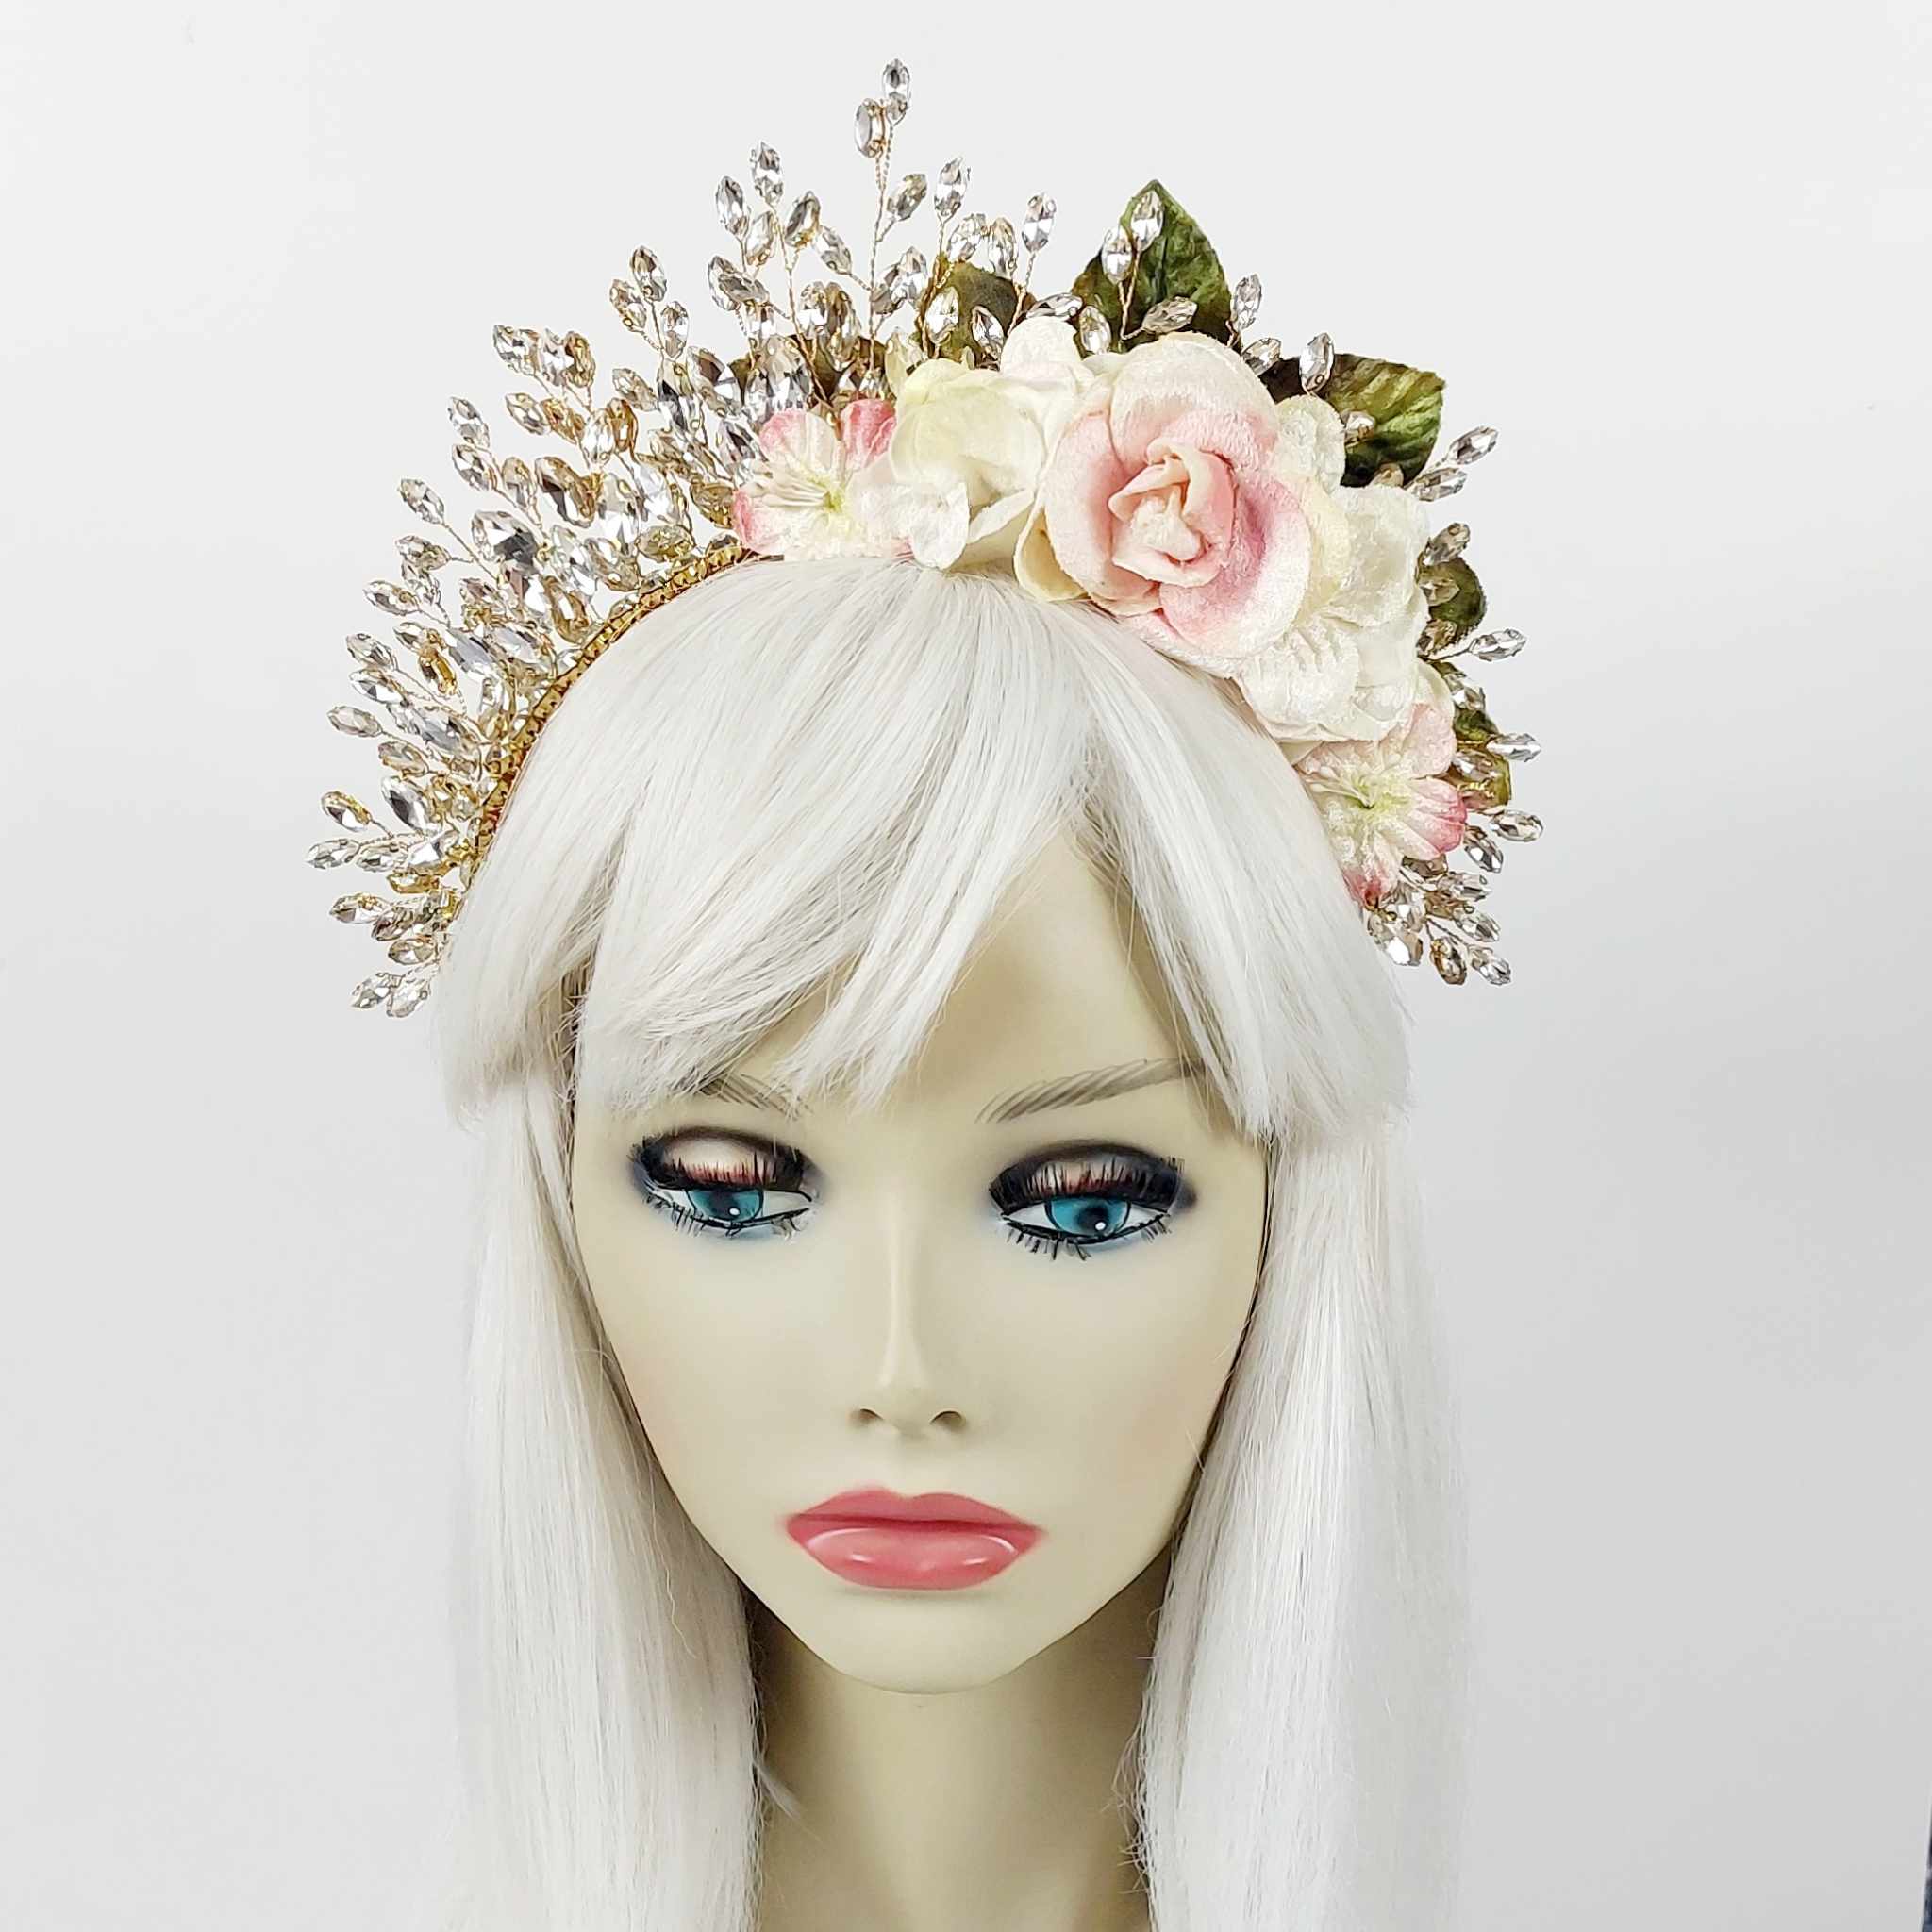 Divalicious Jewelled Headpiece Headband Fascinator for Races Weddings Anniversary Special Events